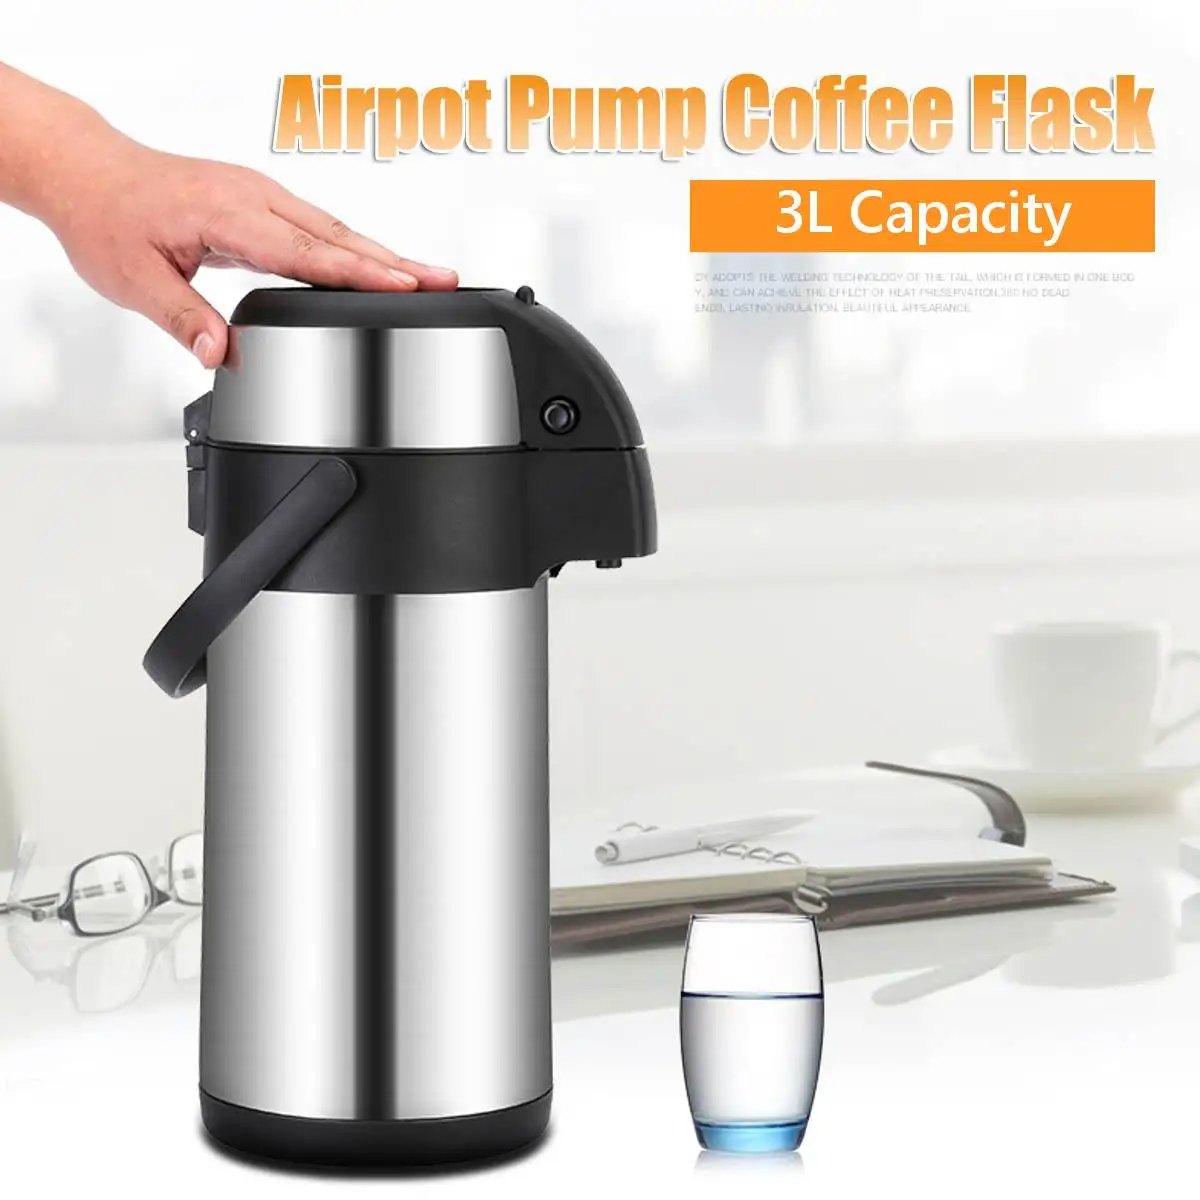 3L VACUUM FLASK AIR POT THERMOS STAINLESSLESS STEEL HOT & COLD DRINKS 